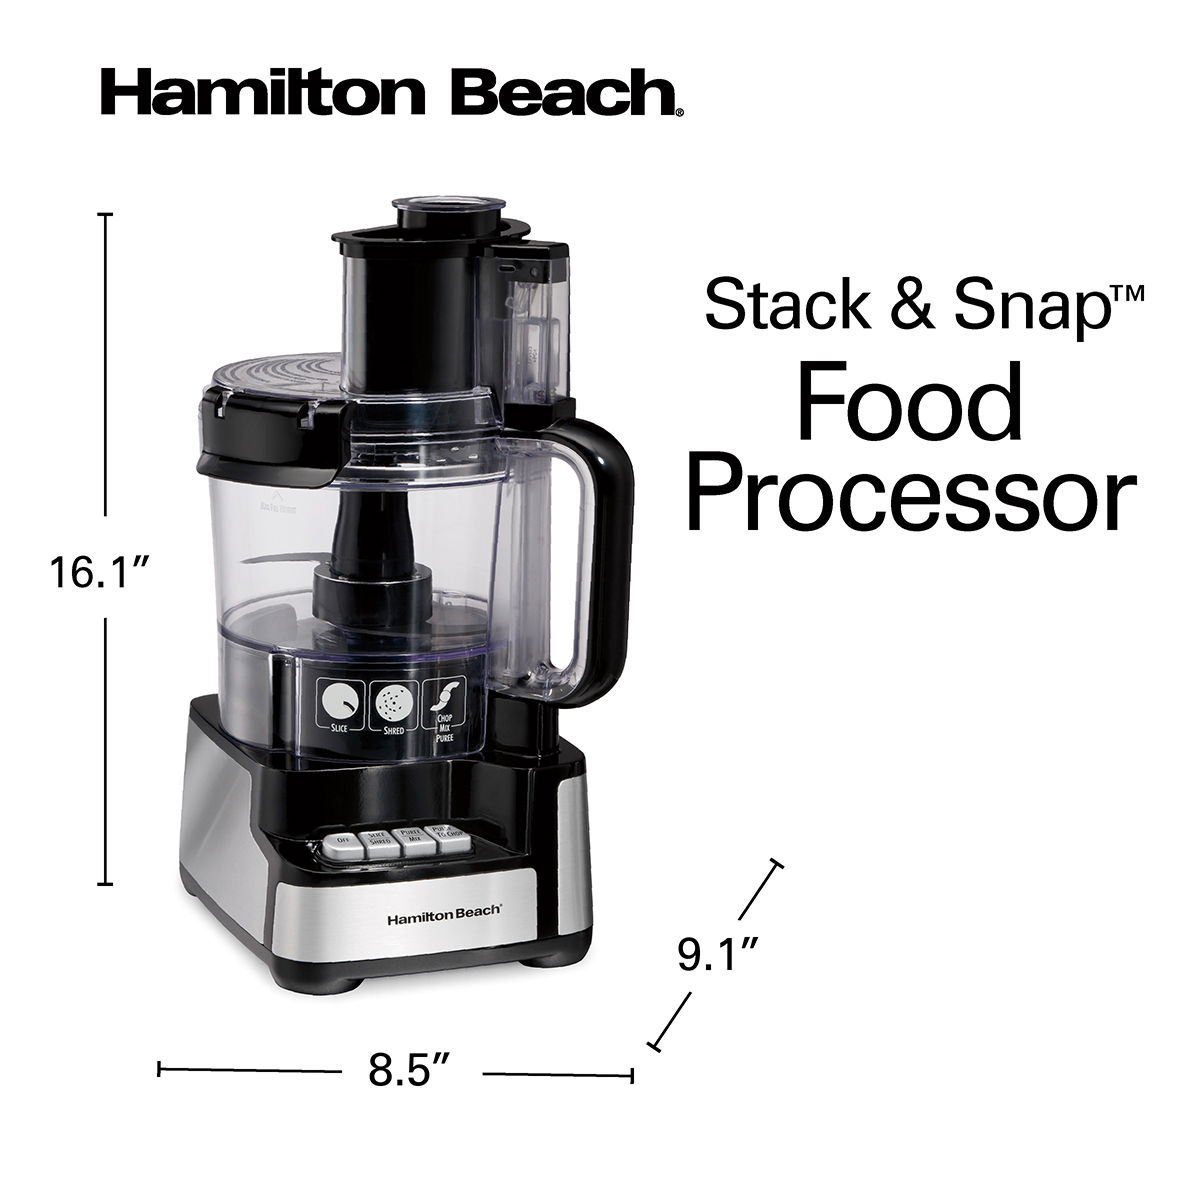 Hamilton Beach 12 Cup Stack & Snap™ Food Processor, Black and Stainless - 70728